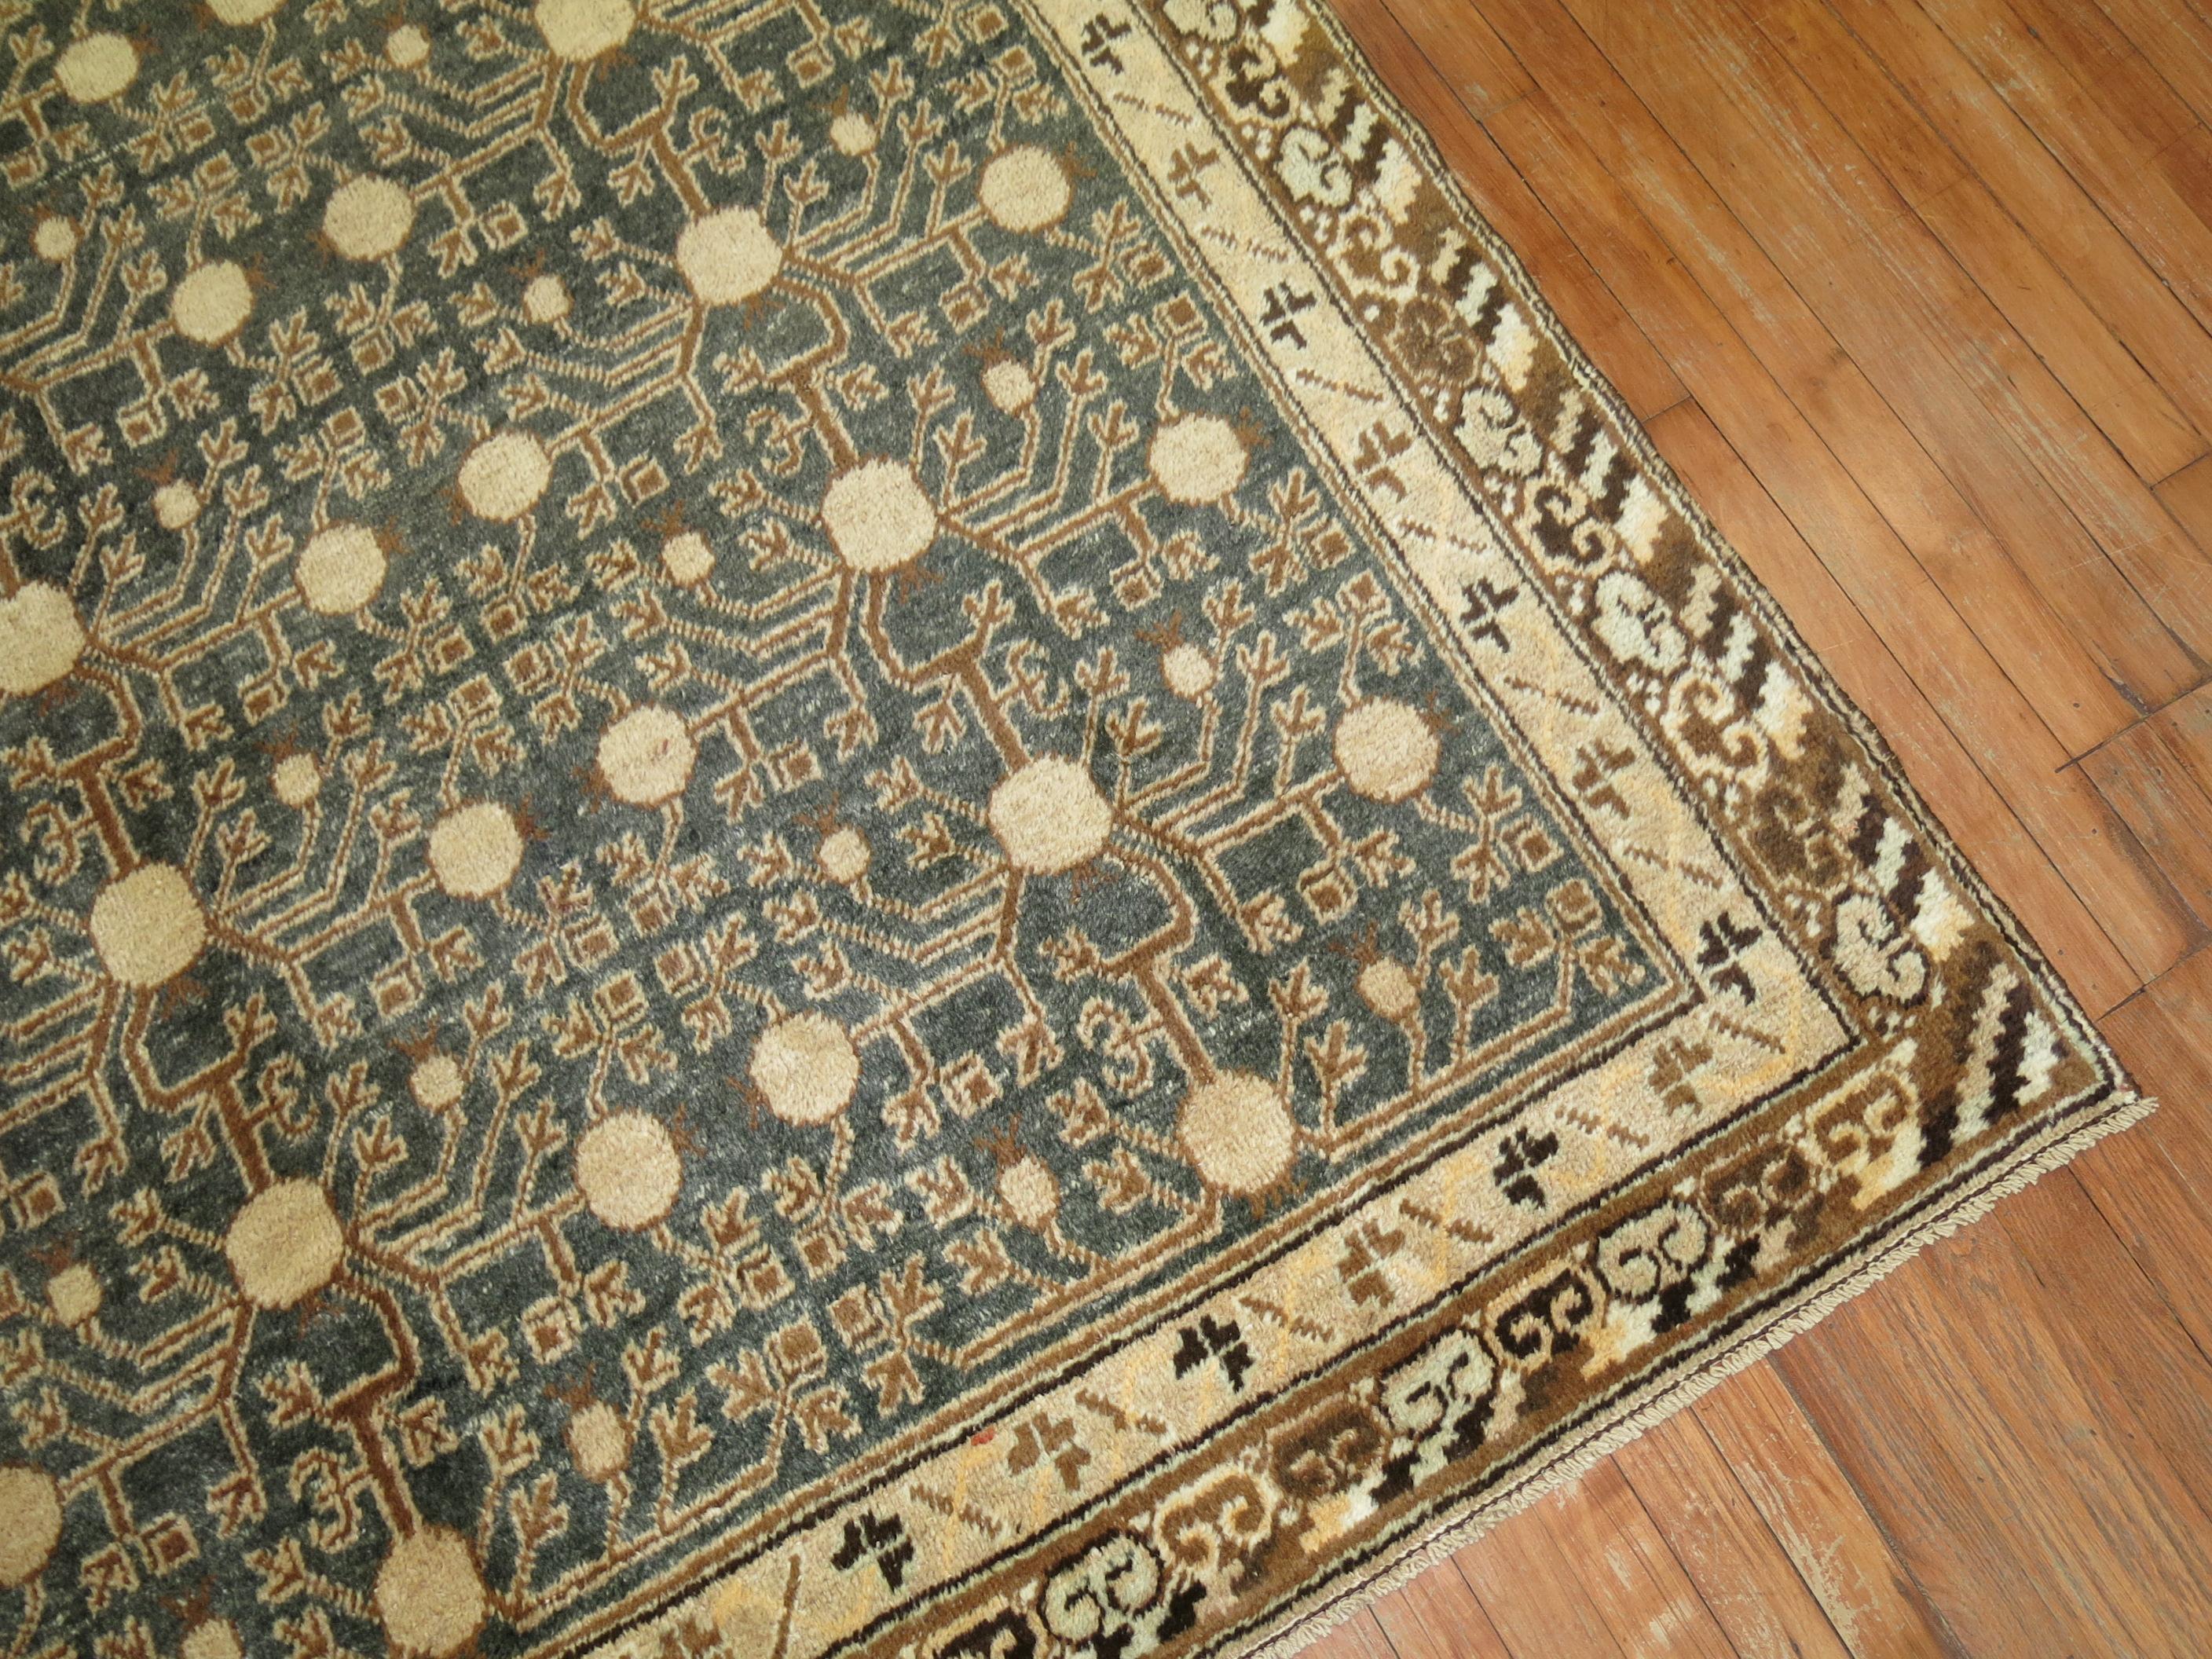 Hand-Woven Khotan Rug in Olive Green and Brown